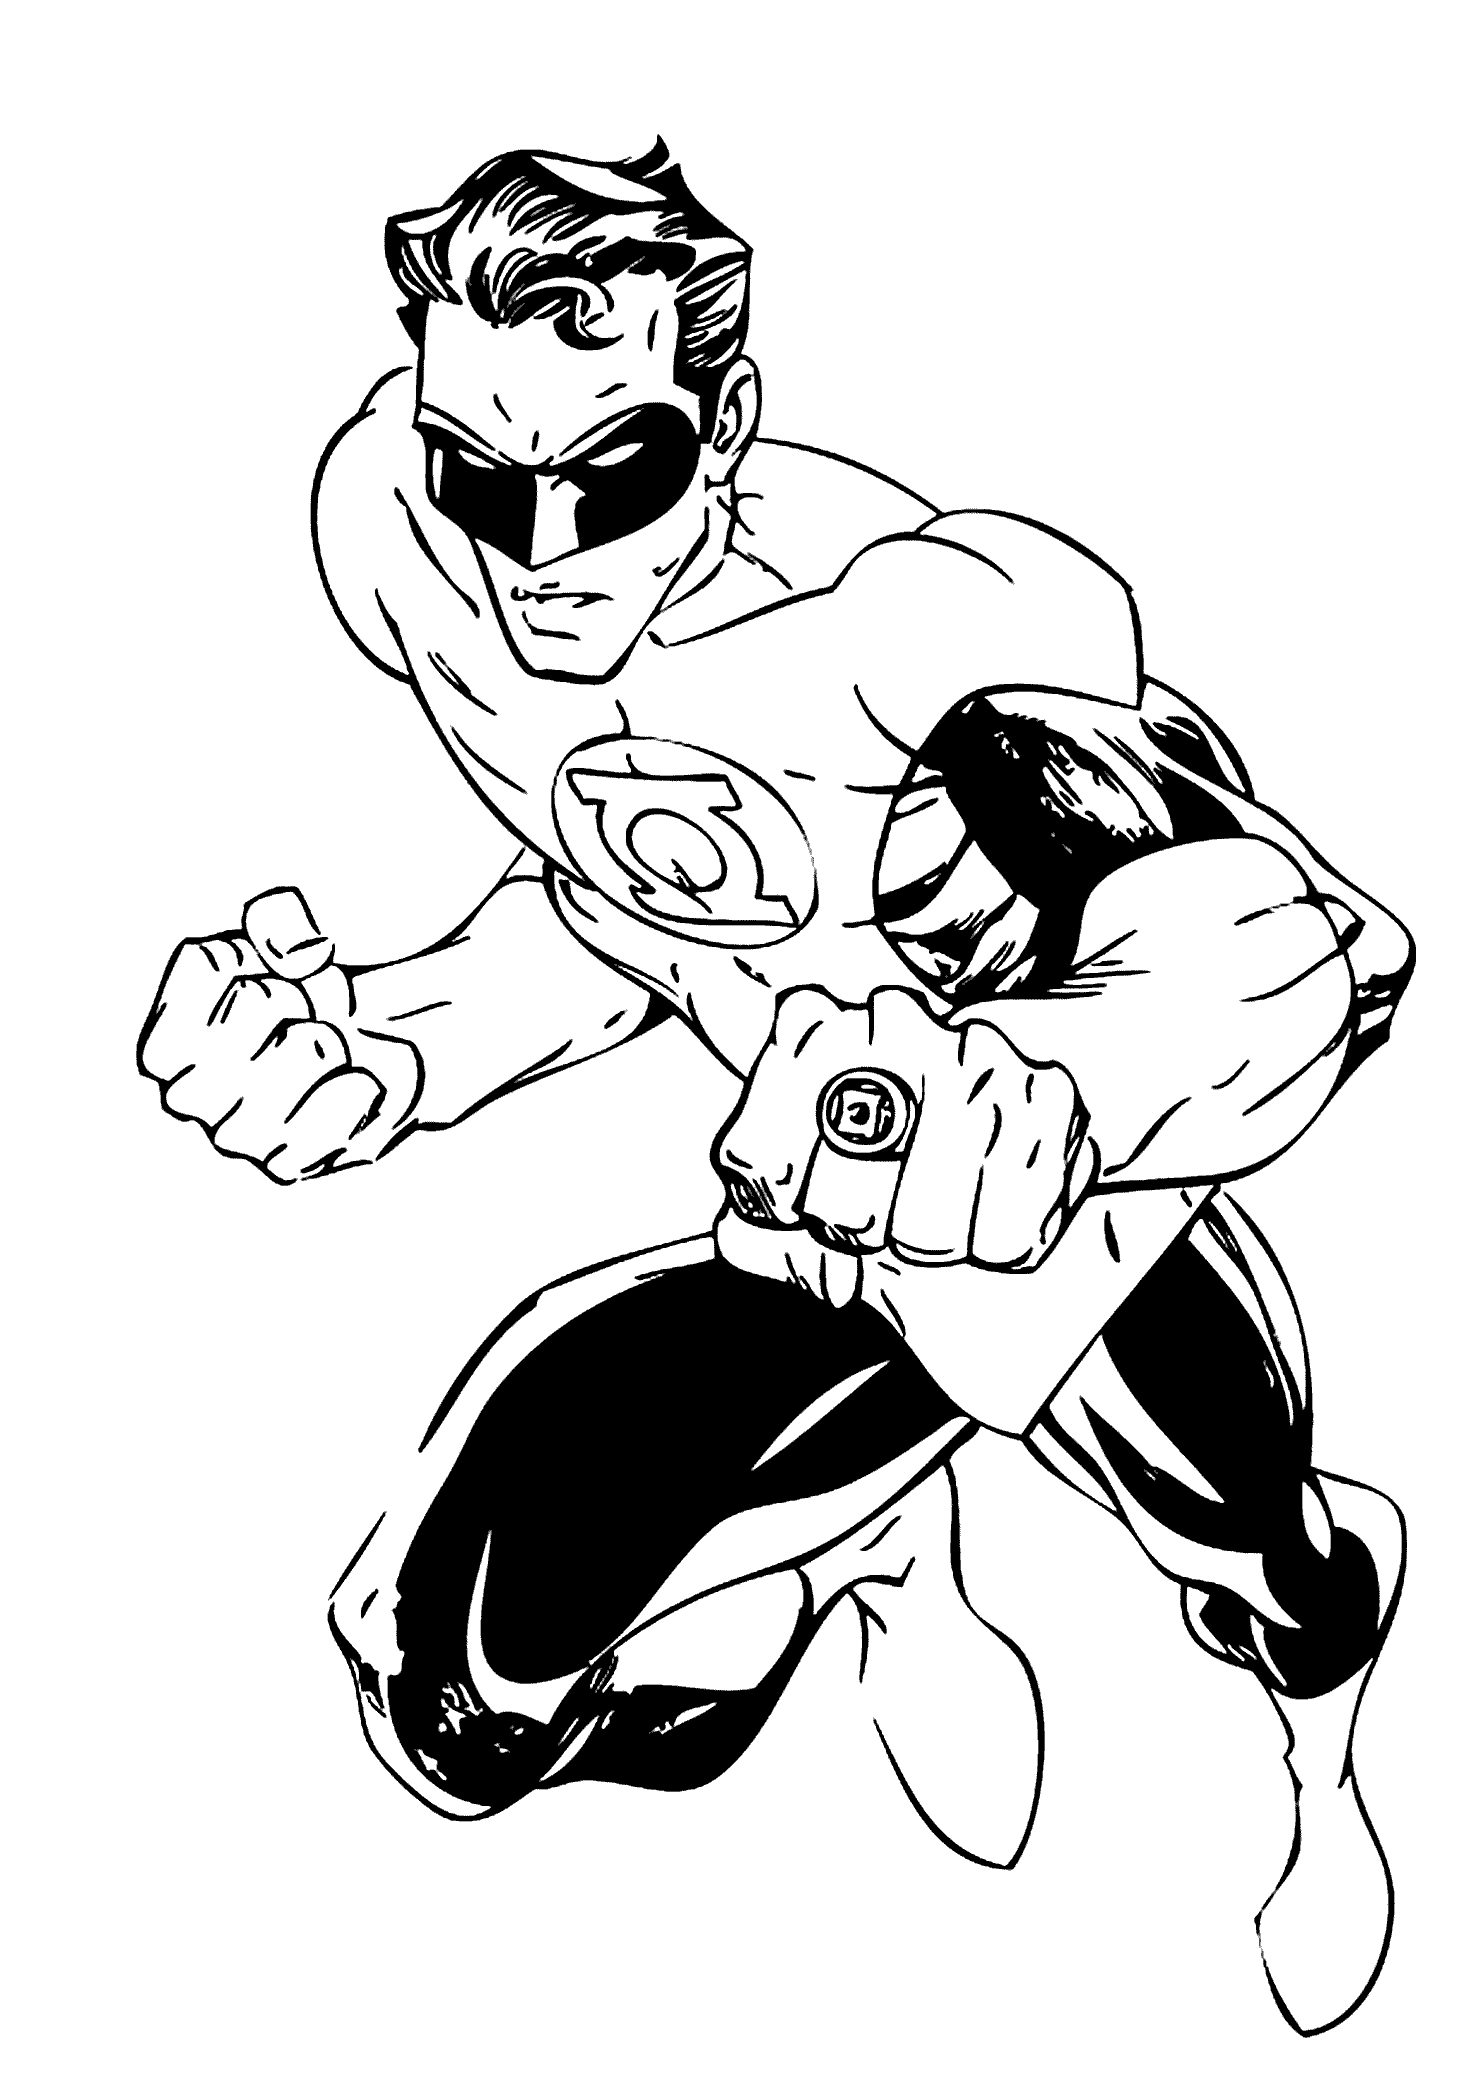 green lantern printable coloring pages green lantern coloring pages to download and print for free lantern coloring green pages printable 